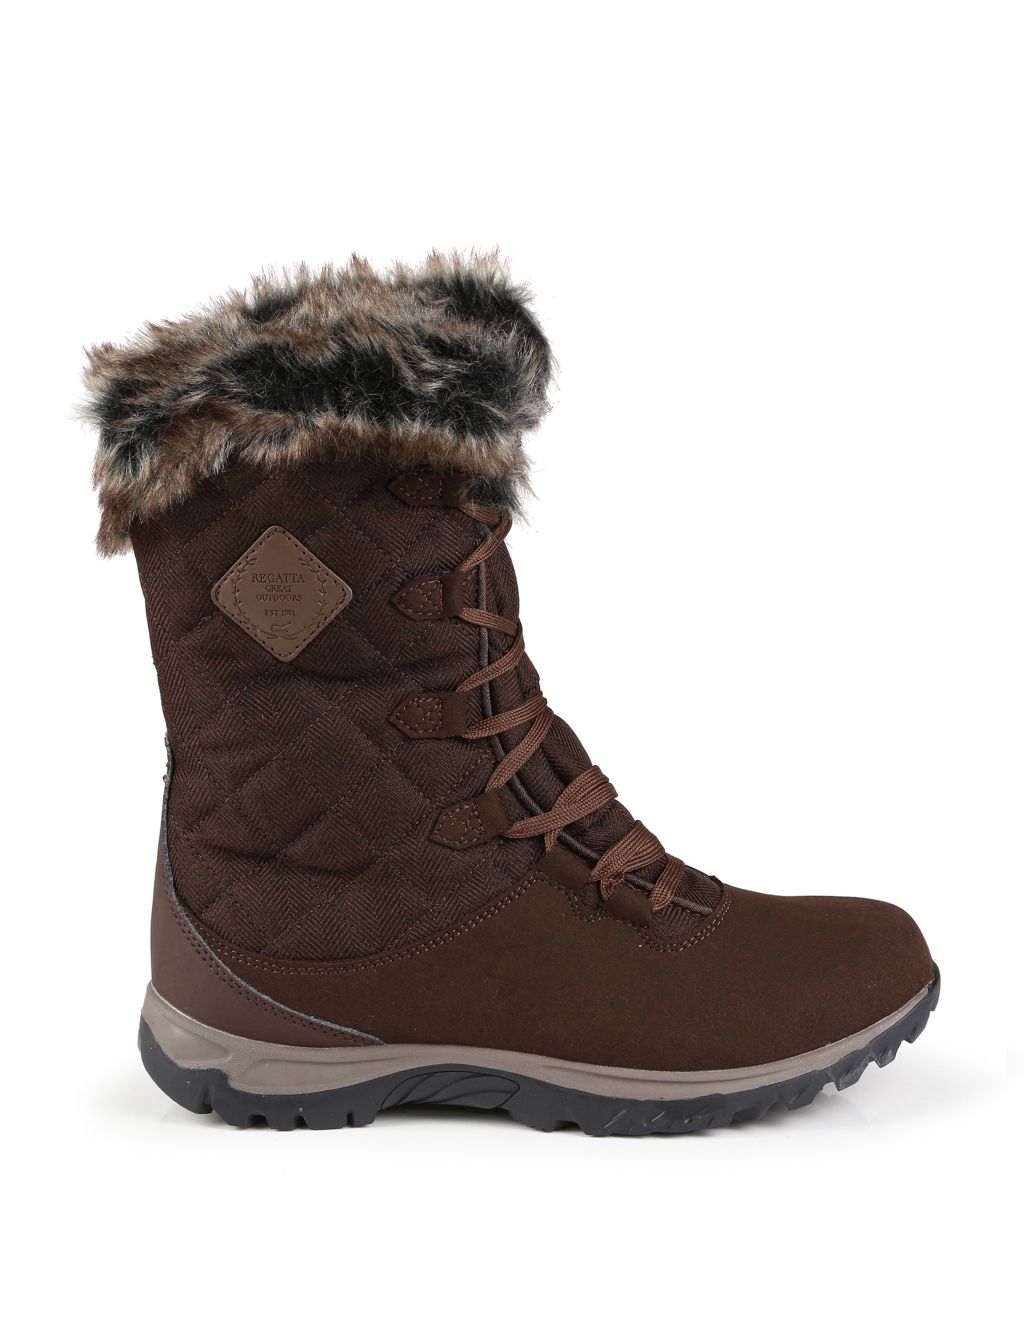 Lady Newley Thermo Winter Boots image 1